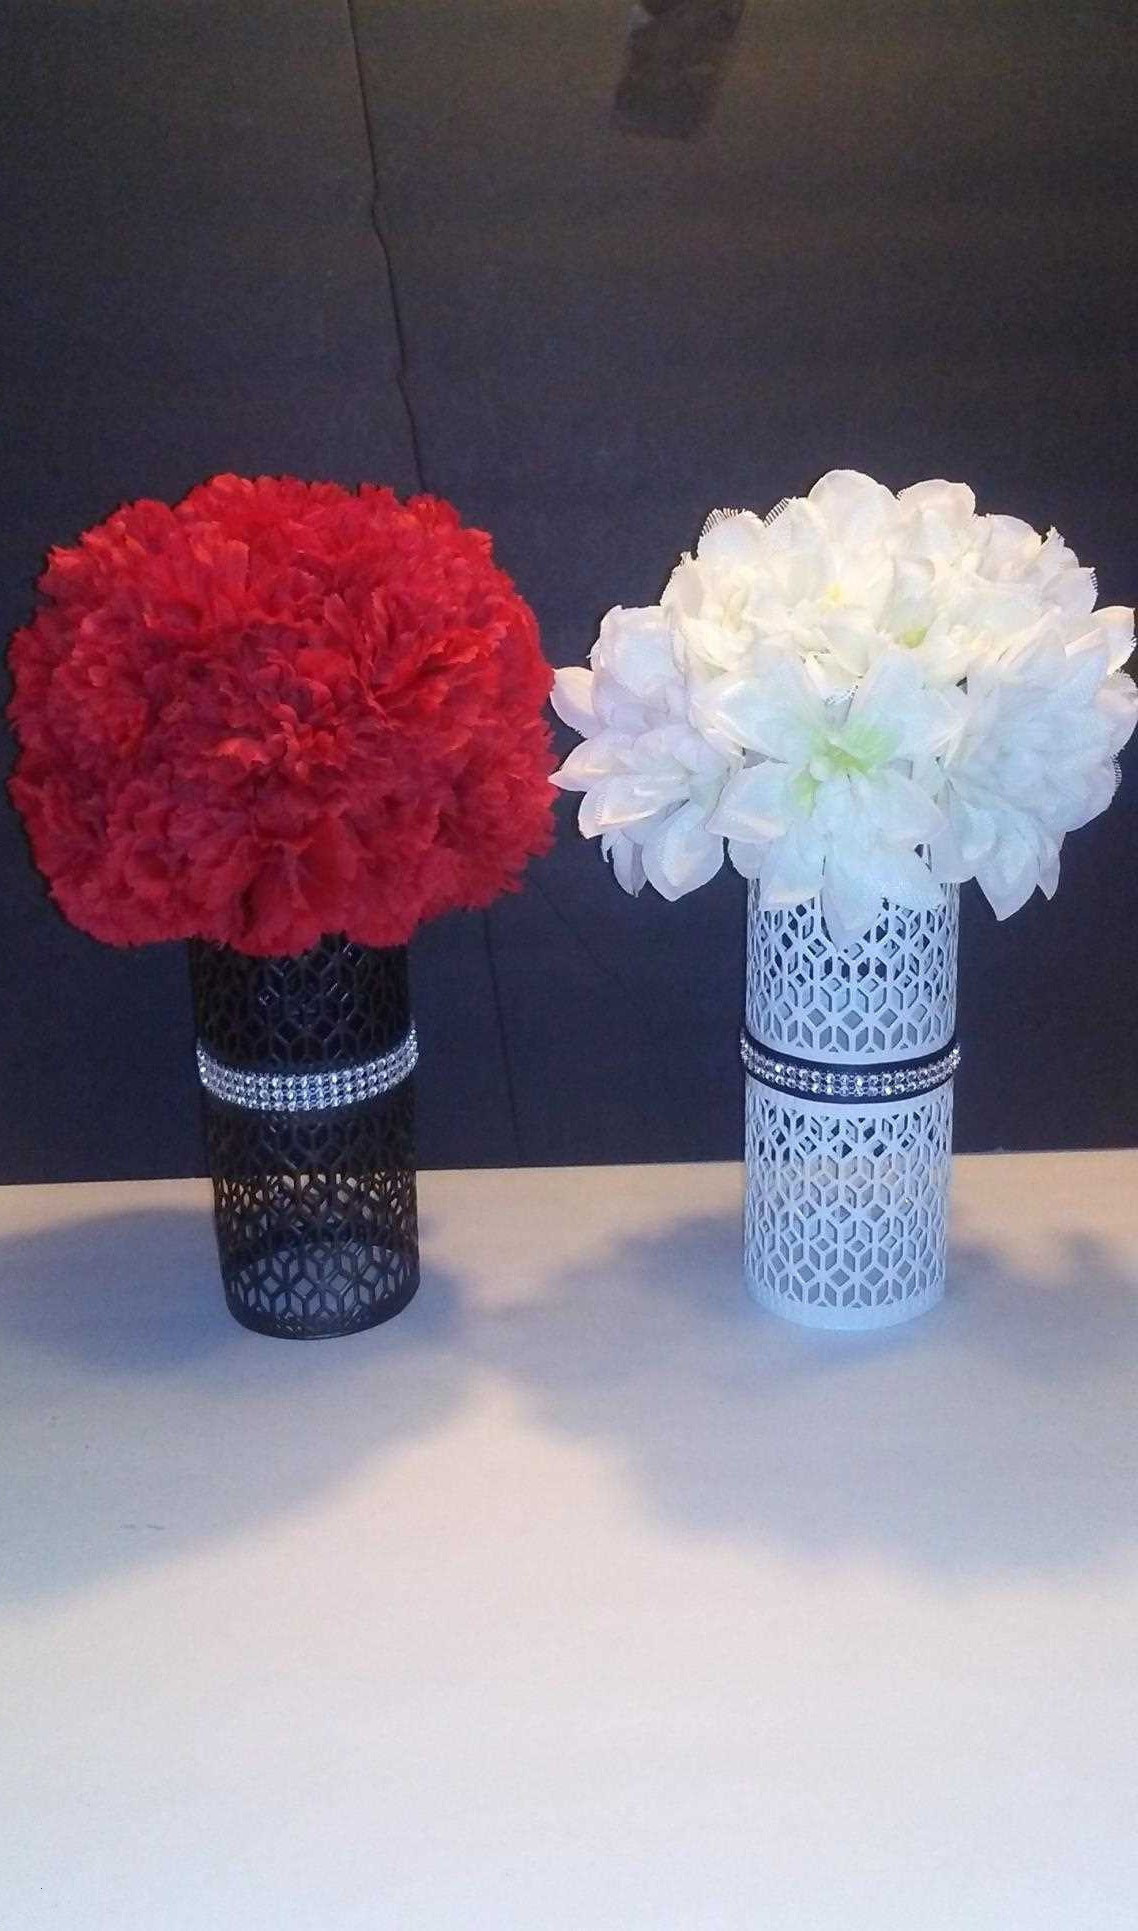 19 Great Pier 1 Red Vase 2022 free download pier 1 red vase of red and white vase collection roses red in a vase singleh vases rose with regard to red and white vase stock red and white wedding decorations best dollar tree wedding of 